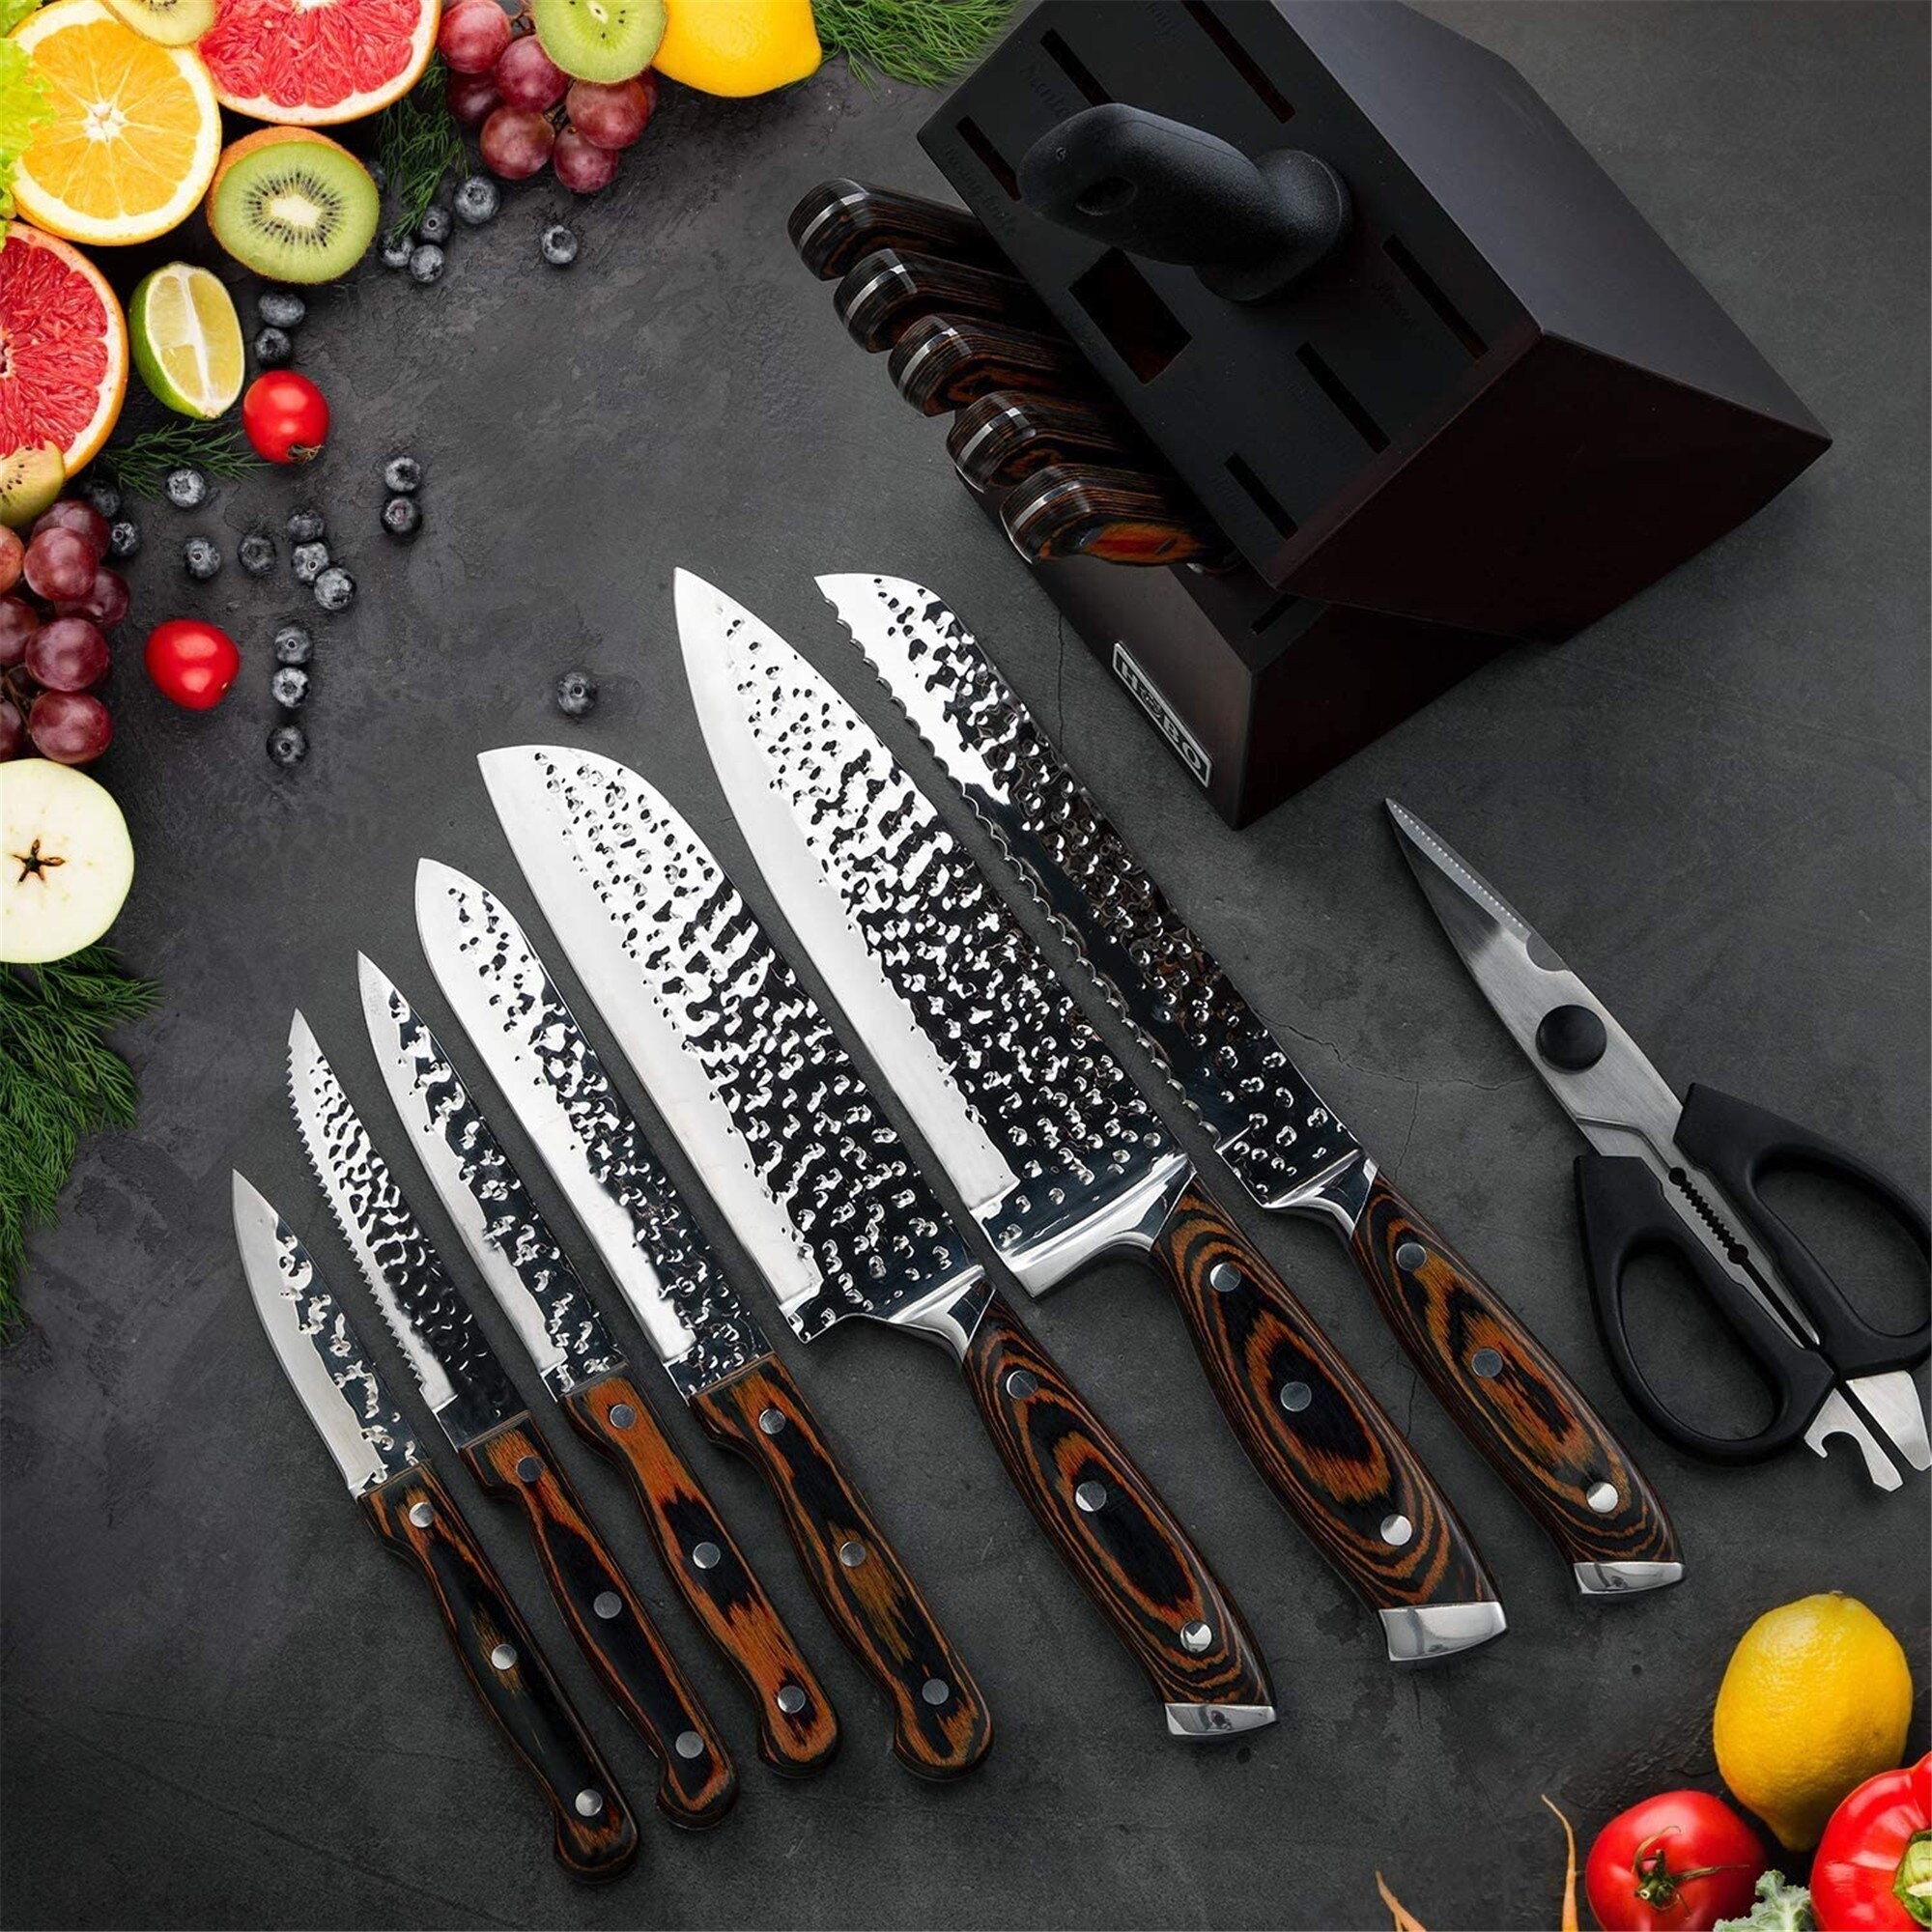 https://ak1.ostkcdn.com/images/products/is/images/direct/c9603e26335b1c0cbb5f168bd3ac19145e969d44/Knife-Set%2C-Elegant-Life-15-Piece-Kitchen-Knife-Set-with-Block-Wooden%2C-Manual-Sharpening-for-Chef-Knife-Set%2C-Self-Sharpening.jpg